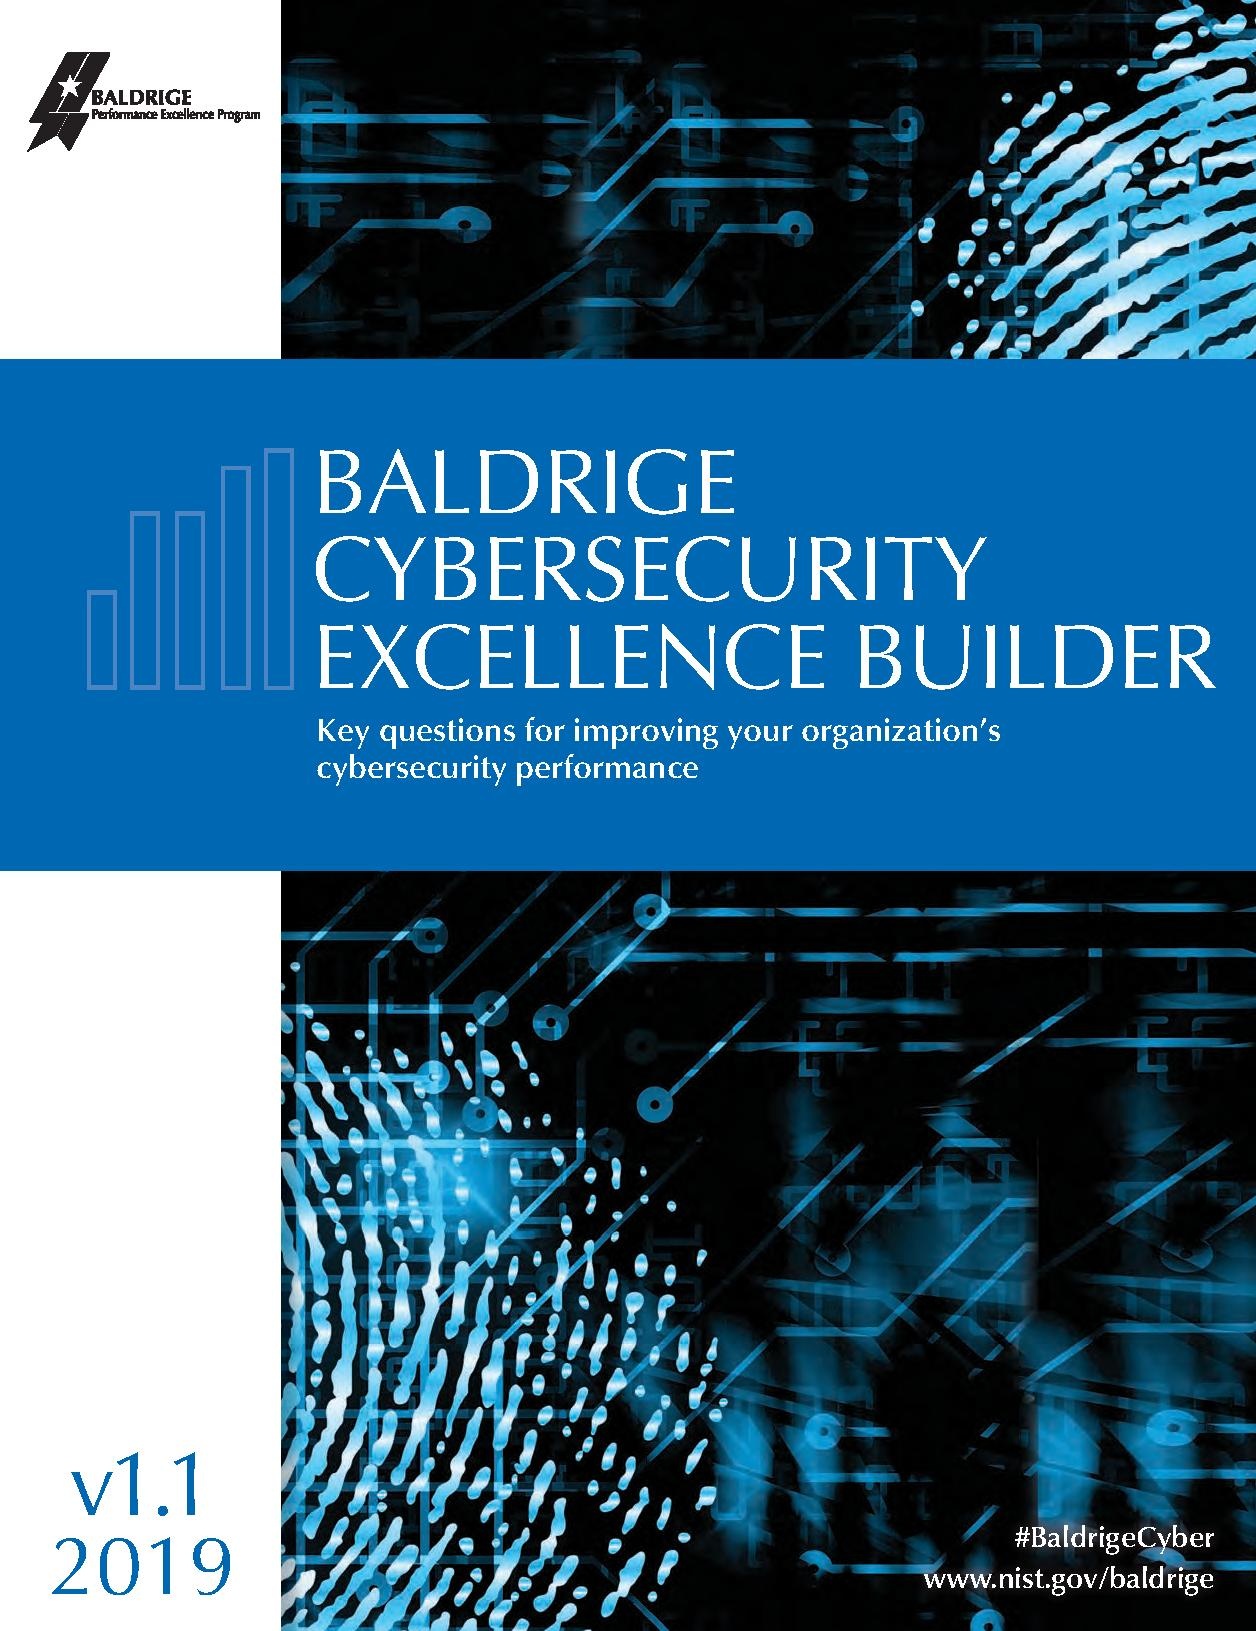 Baldrige Cybersecurity Excellence Builder V1.1